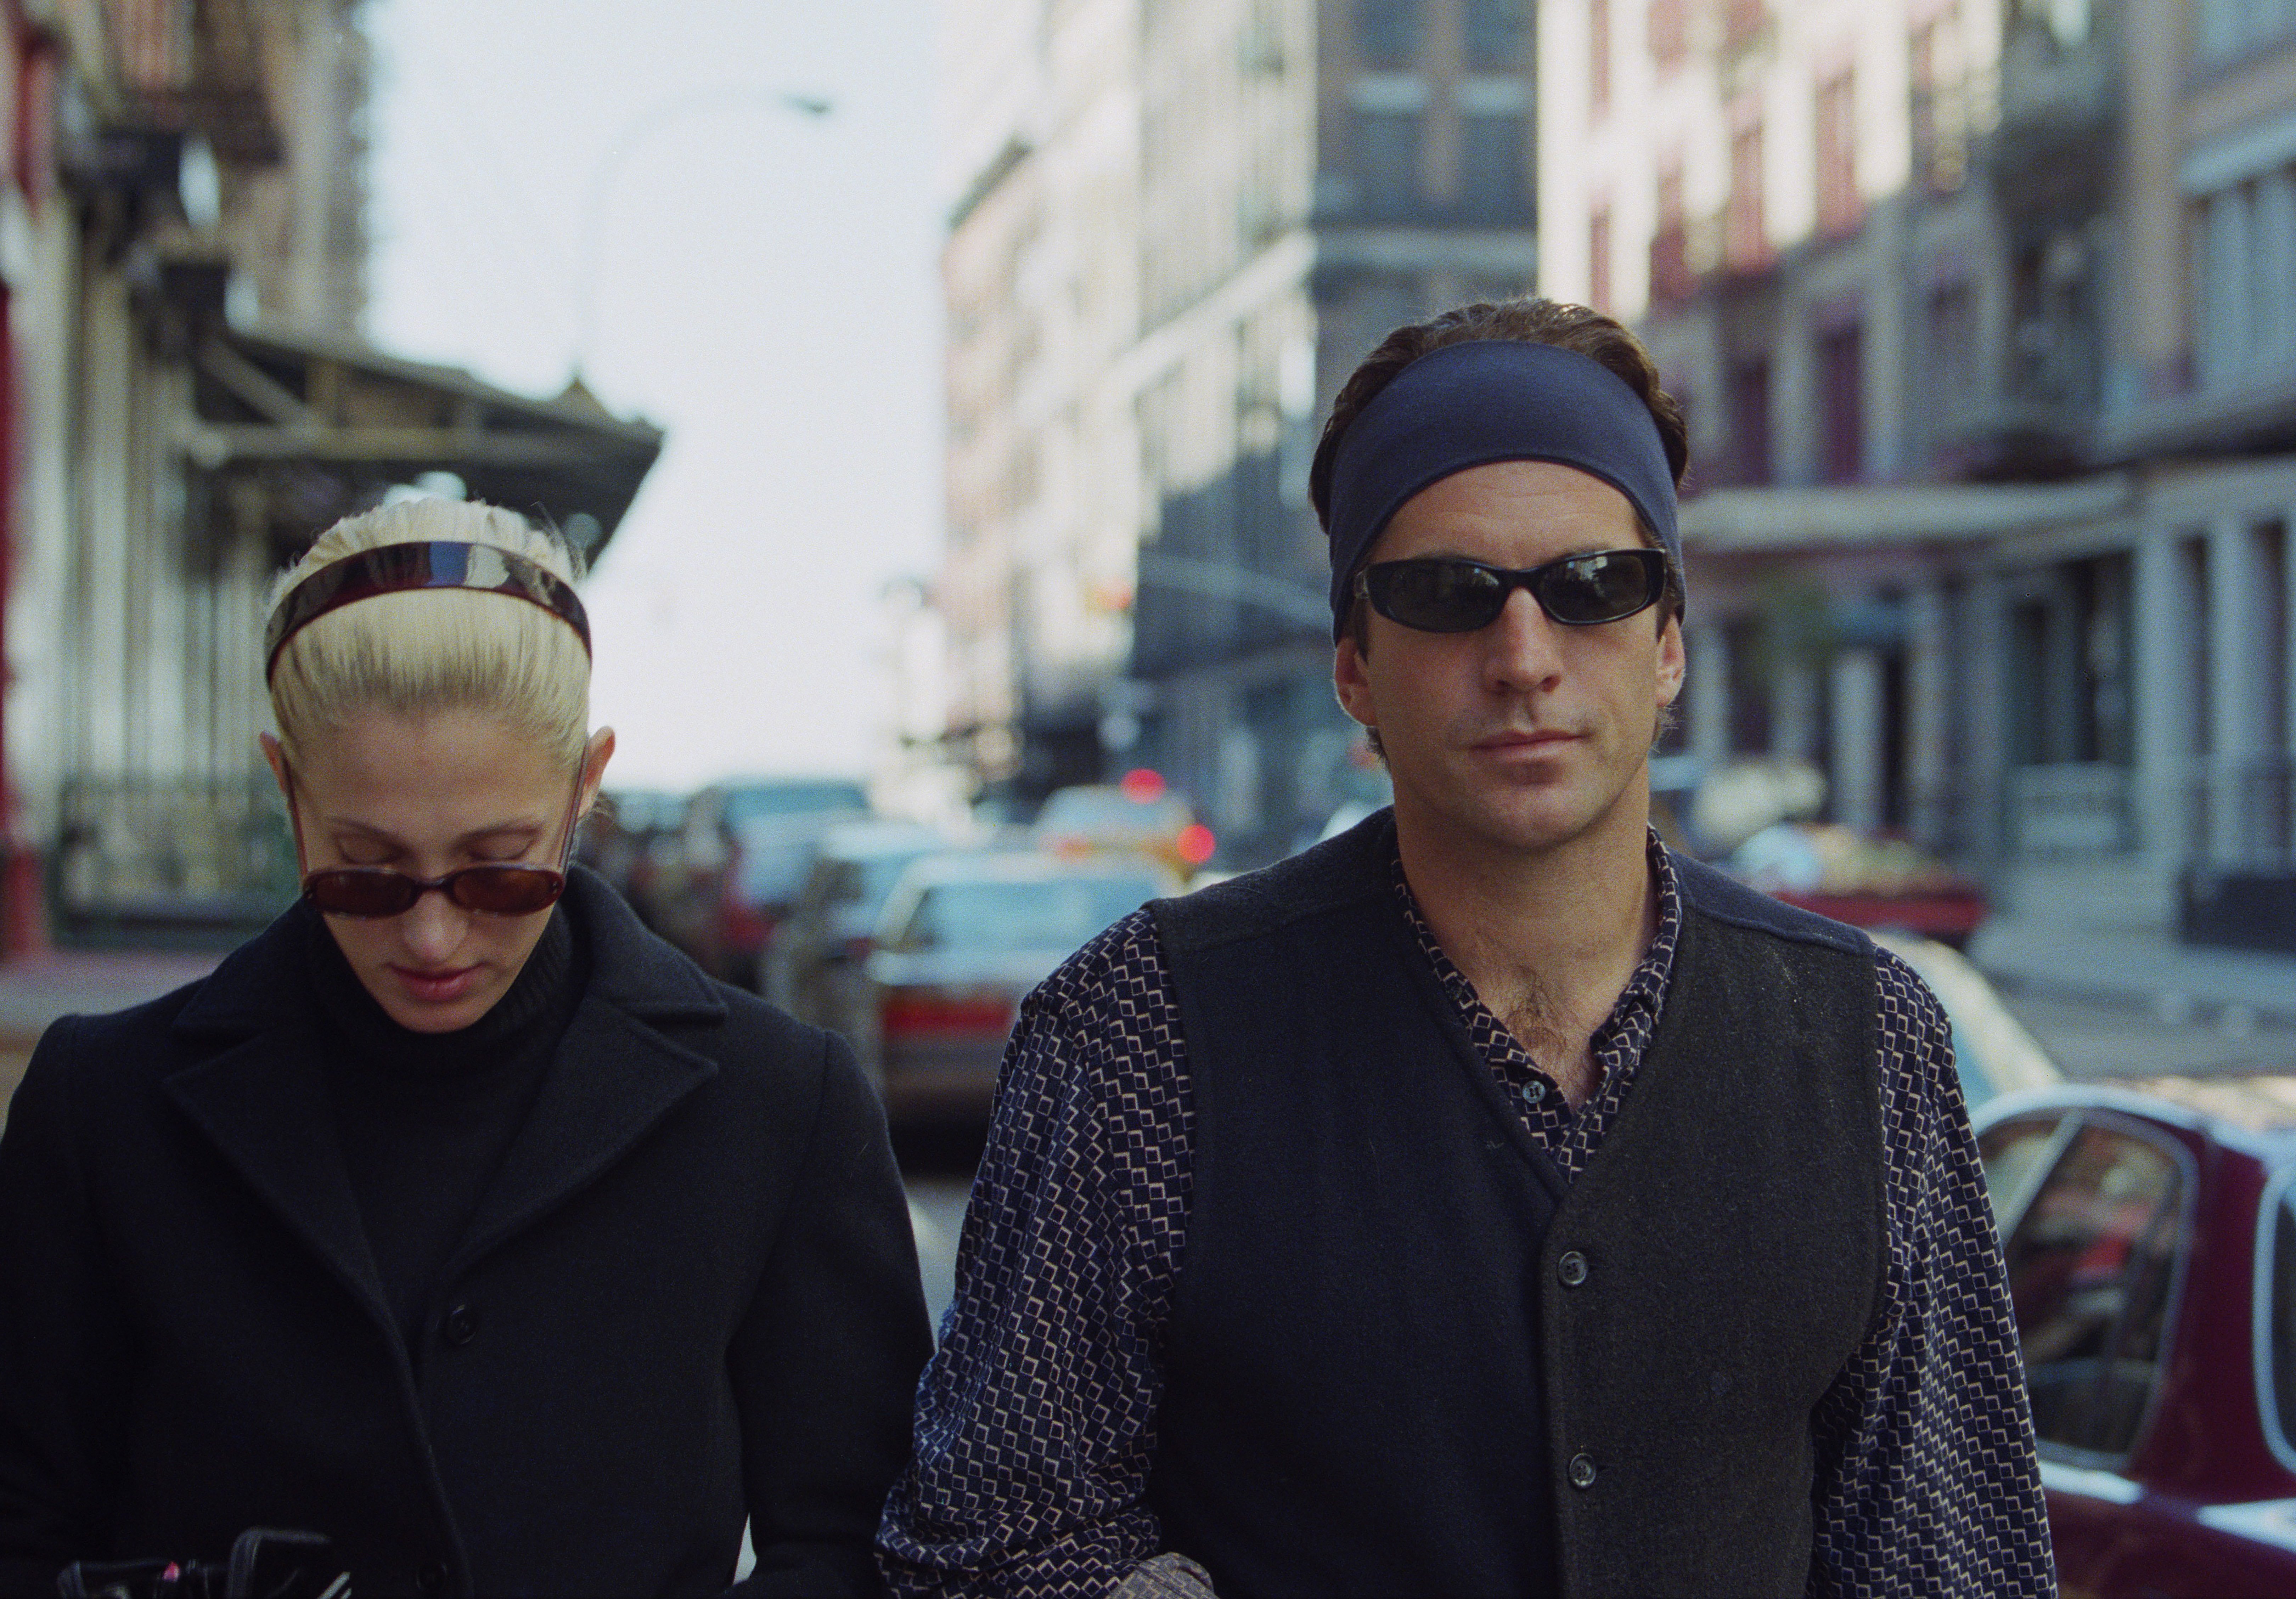 John Kennedy, Jr. and Carolyn Bessette-Kennedy pictured taking a walk near their Tribeca loft. / Source: Getty Images